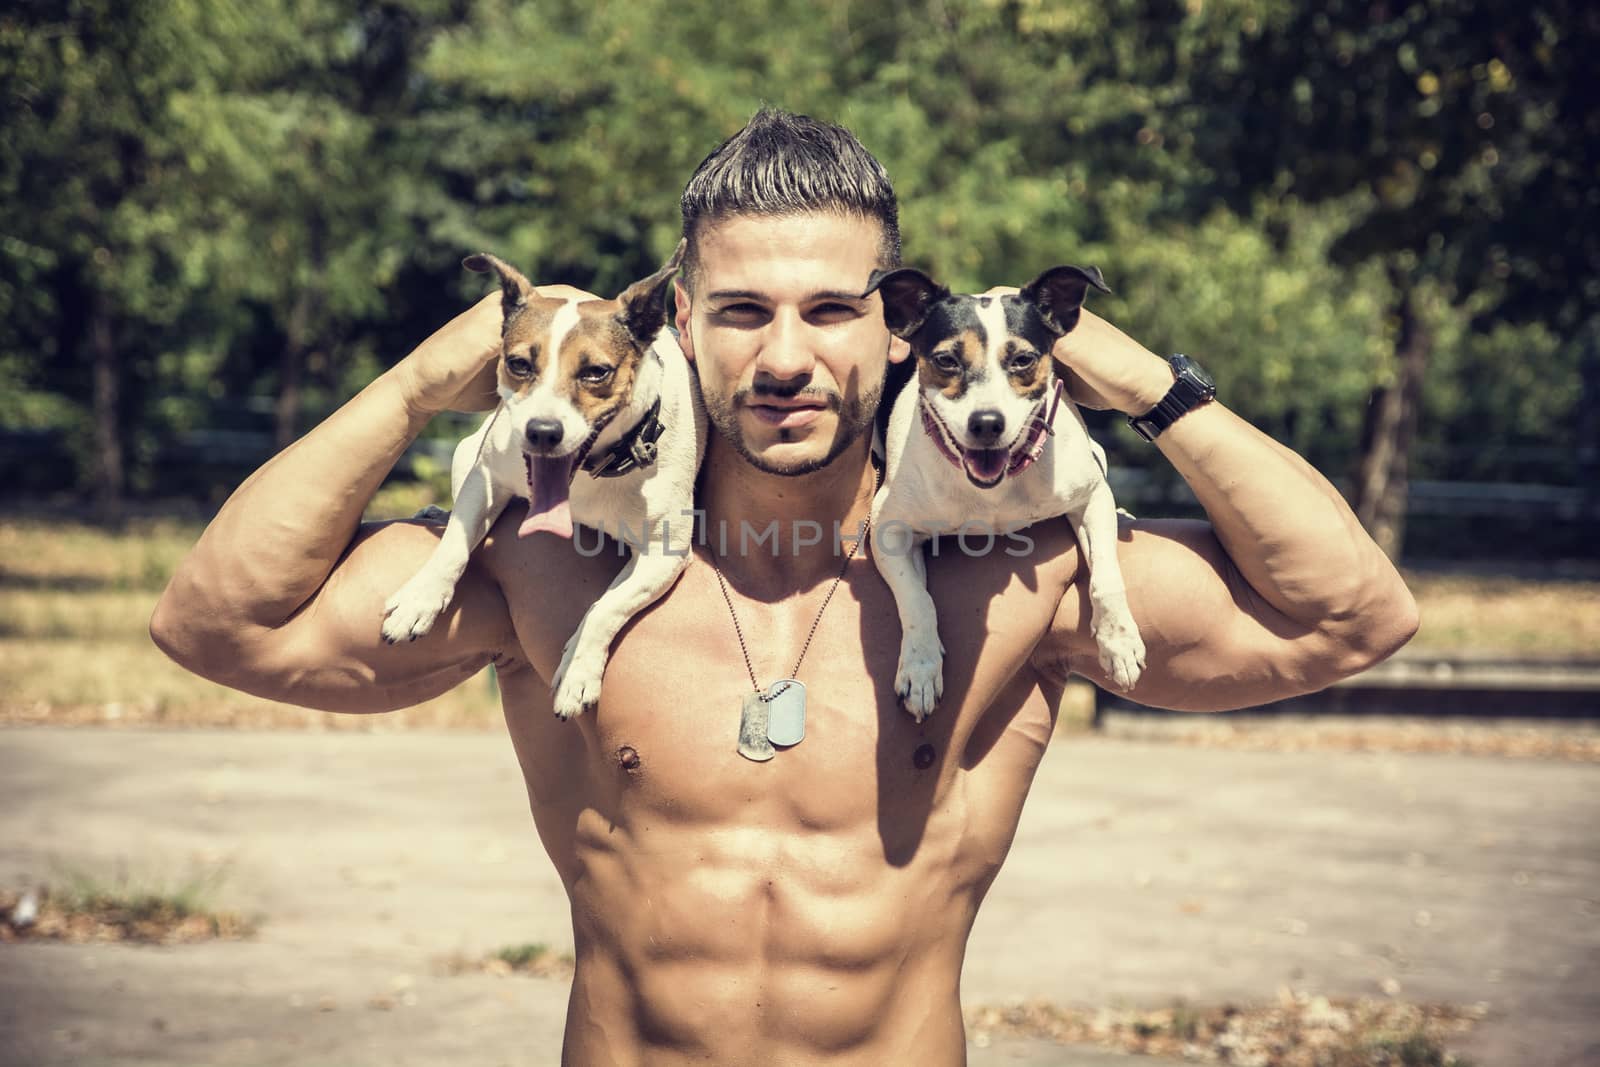 Half Body Shot of a Shirtless Athletic Young Man Carrying Two Dogs on his Shoulders and Looking at the Camera.